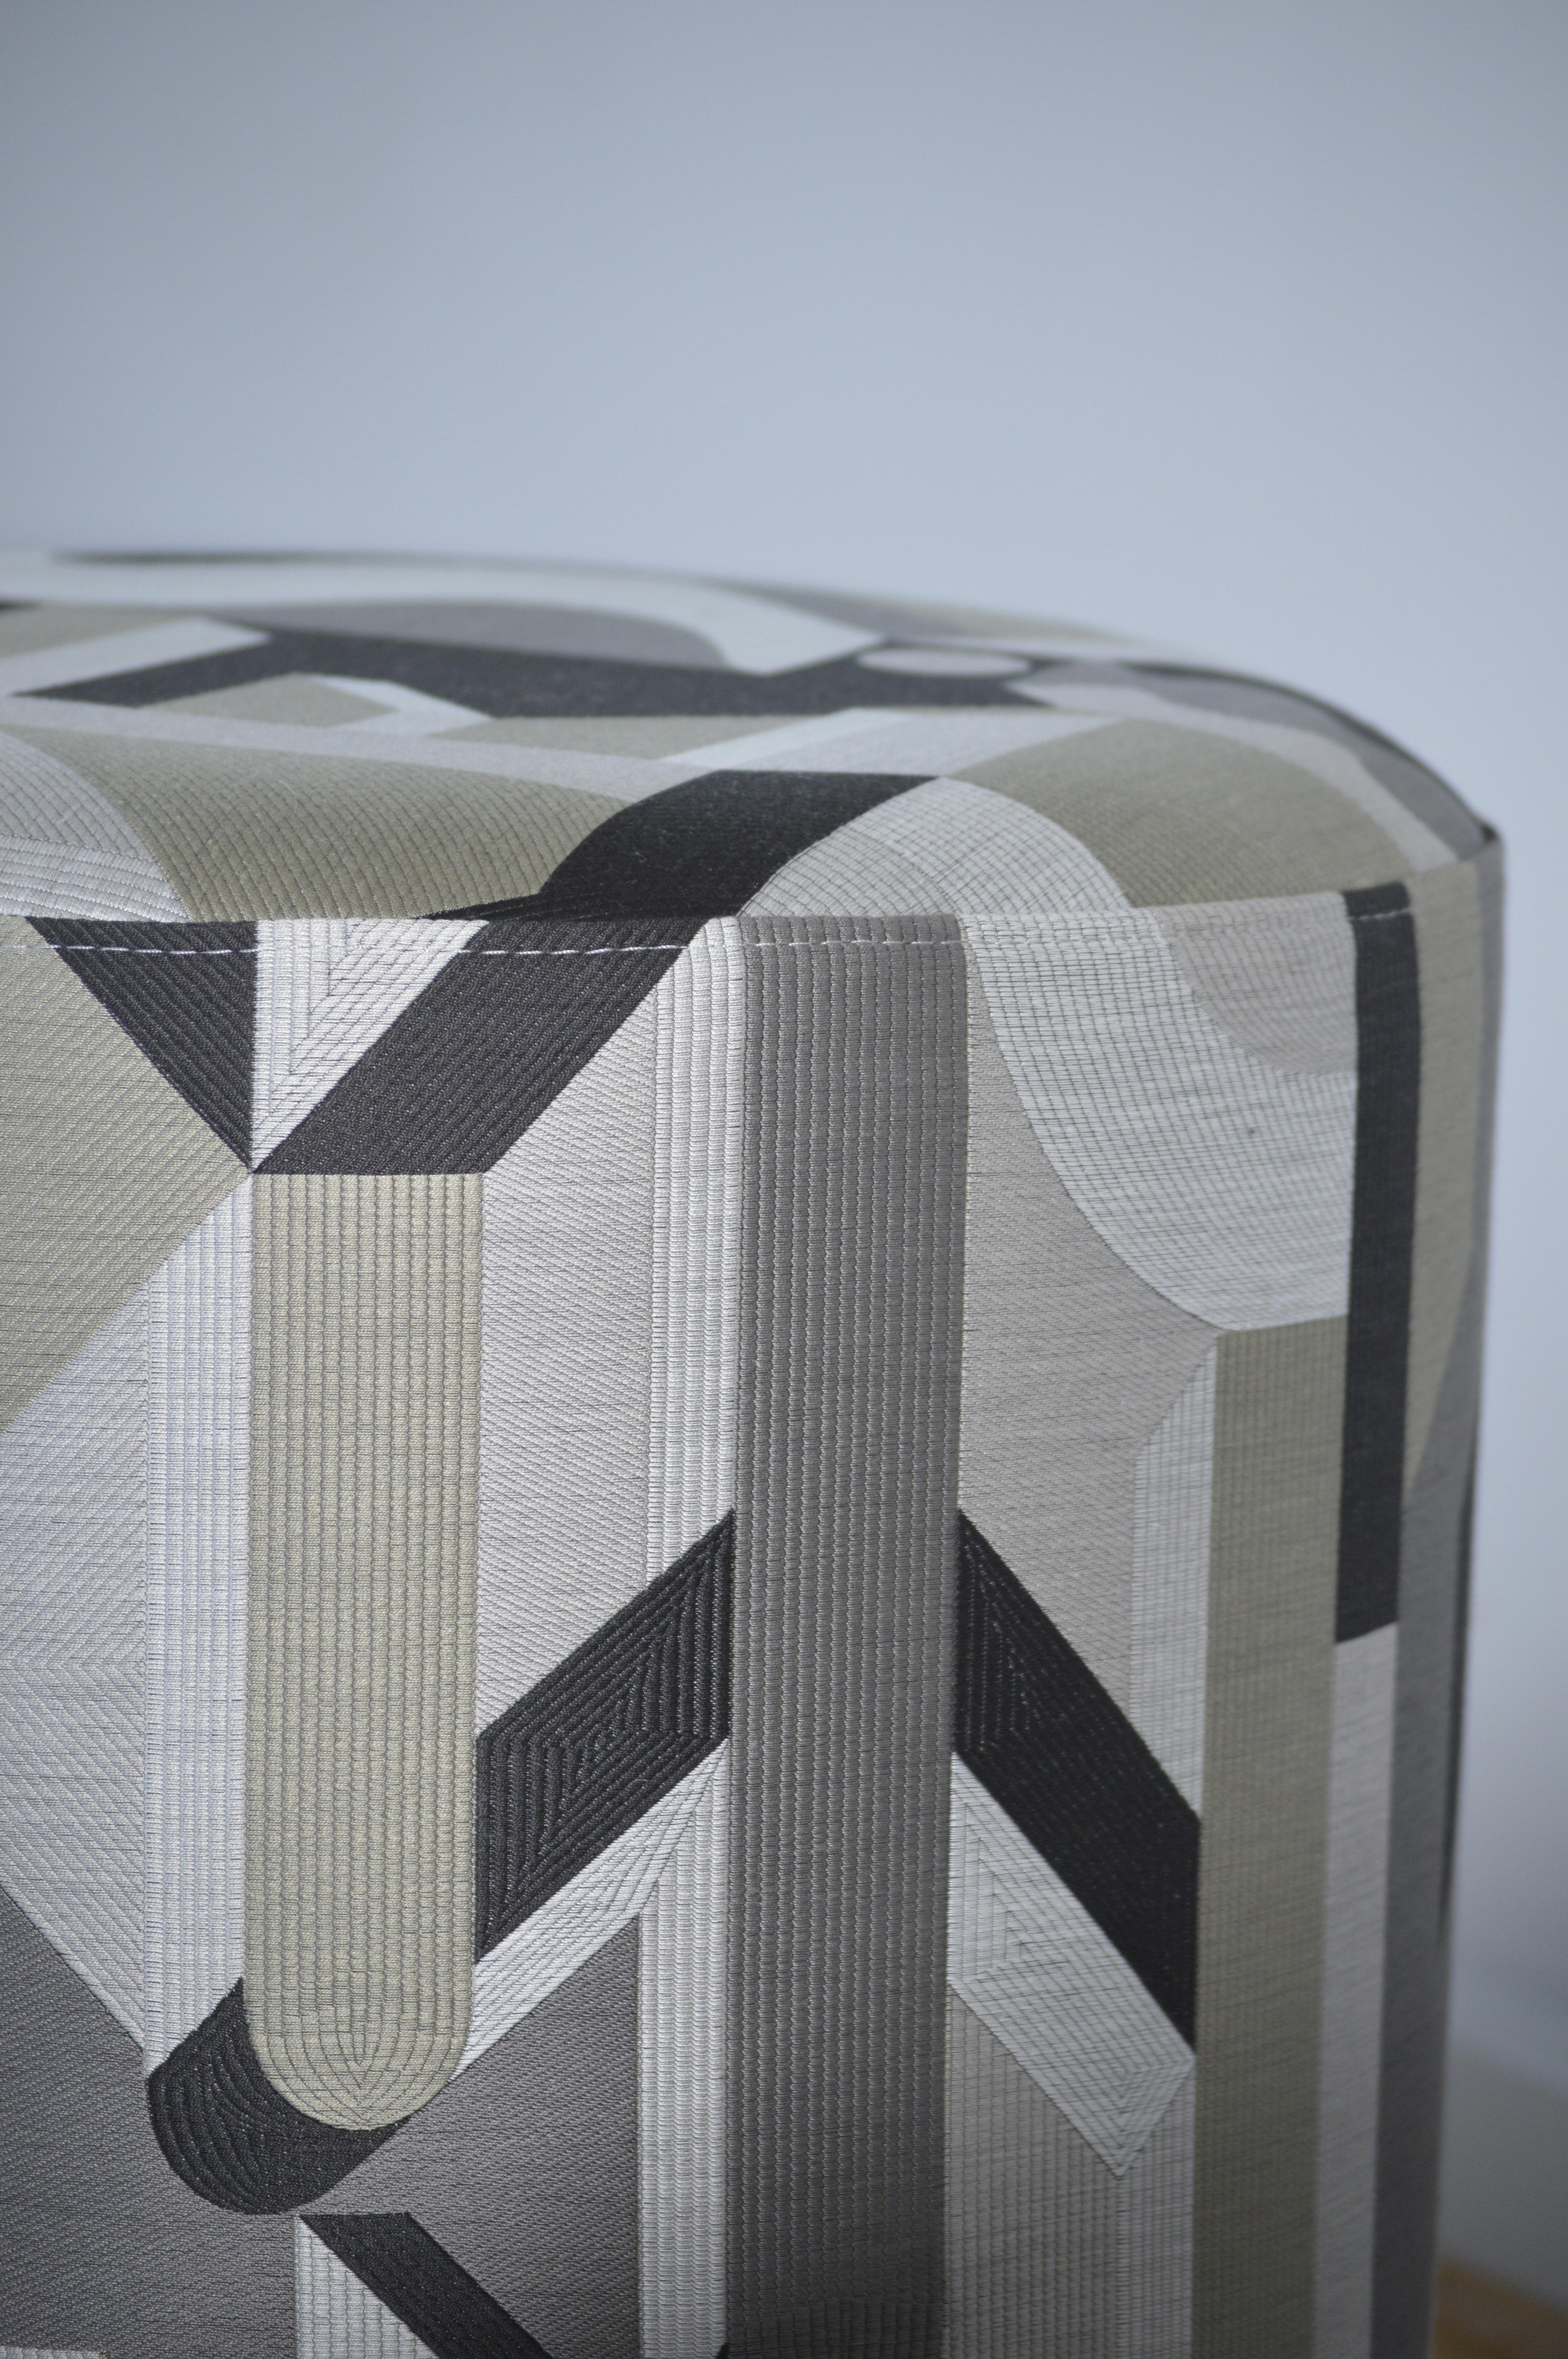 La Sorellina, Small Pouf in Hermes Fabric on Stained Oak Base with Steel Decor In New Condition For Sale In Copenhagen, DK